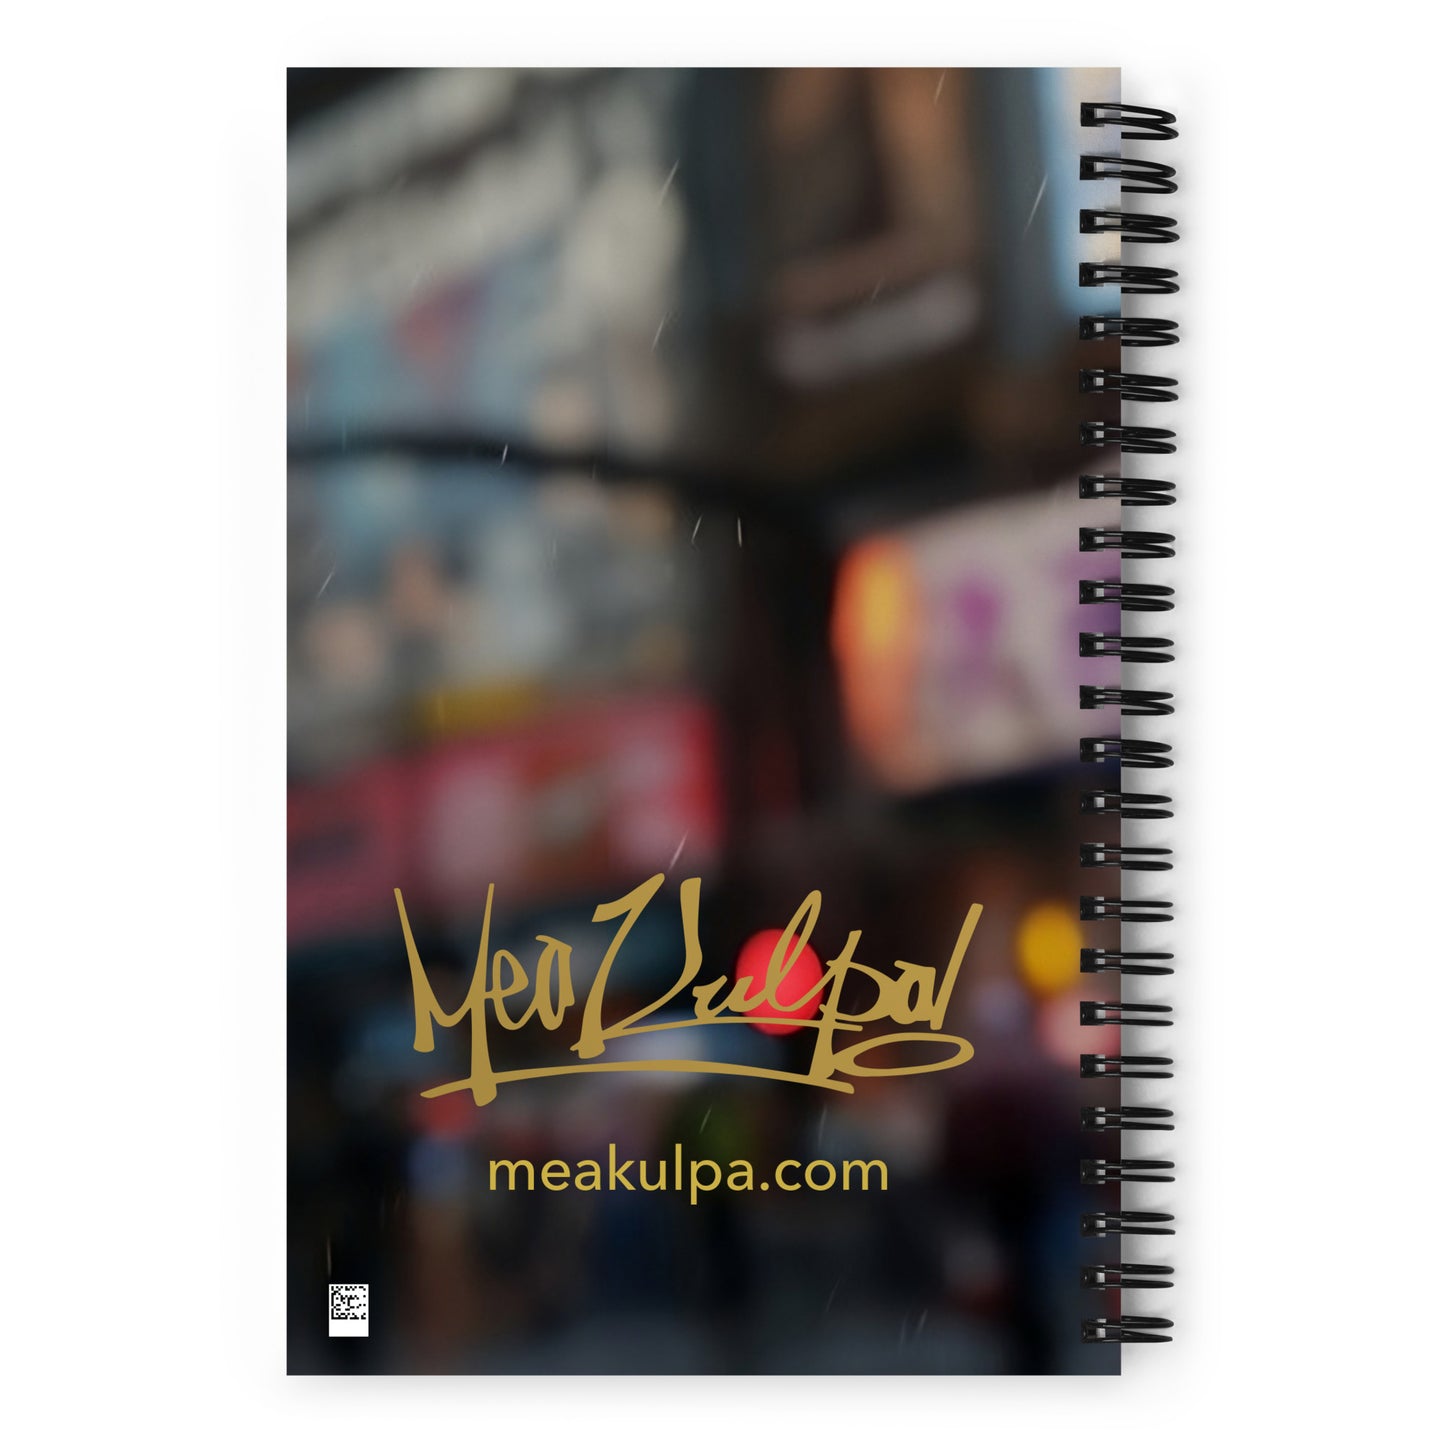  ChatGPT Neon Street Vibes: MeaKulpa Future Girl Spiral Notepad Back Cover  In this mesmerizing image, the back cover of the MeaKulpa Future Girl Spiral Notepad unveils a neon-lit street backdrop, creating an urban ambiance. The street's vibrant energy is delicately blurred, offering a dynamic contrast to the forefront. The gold MeaKulpa OG logo stands boldly against this neon dreamscape, while the meakulpa.com URL adds a touch of digital allure.